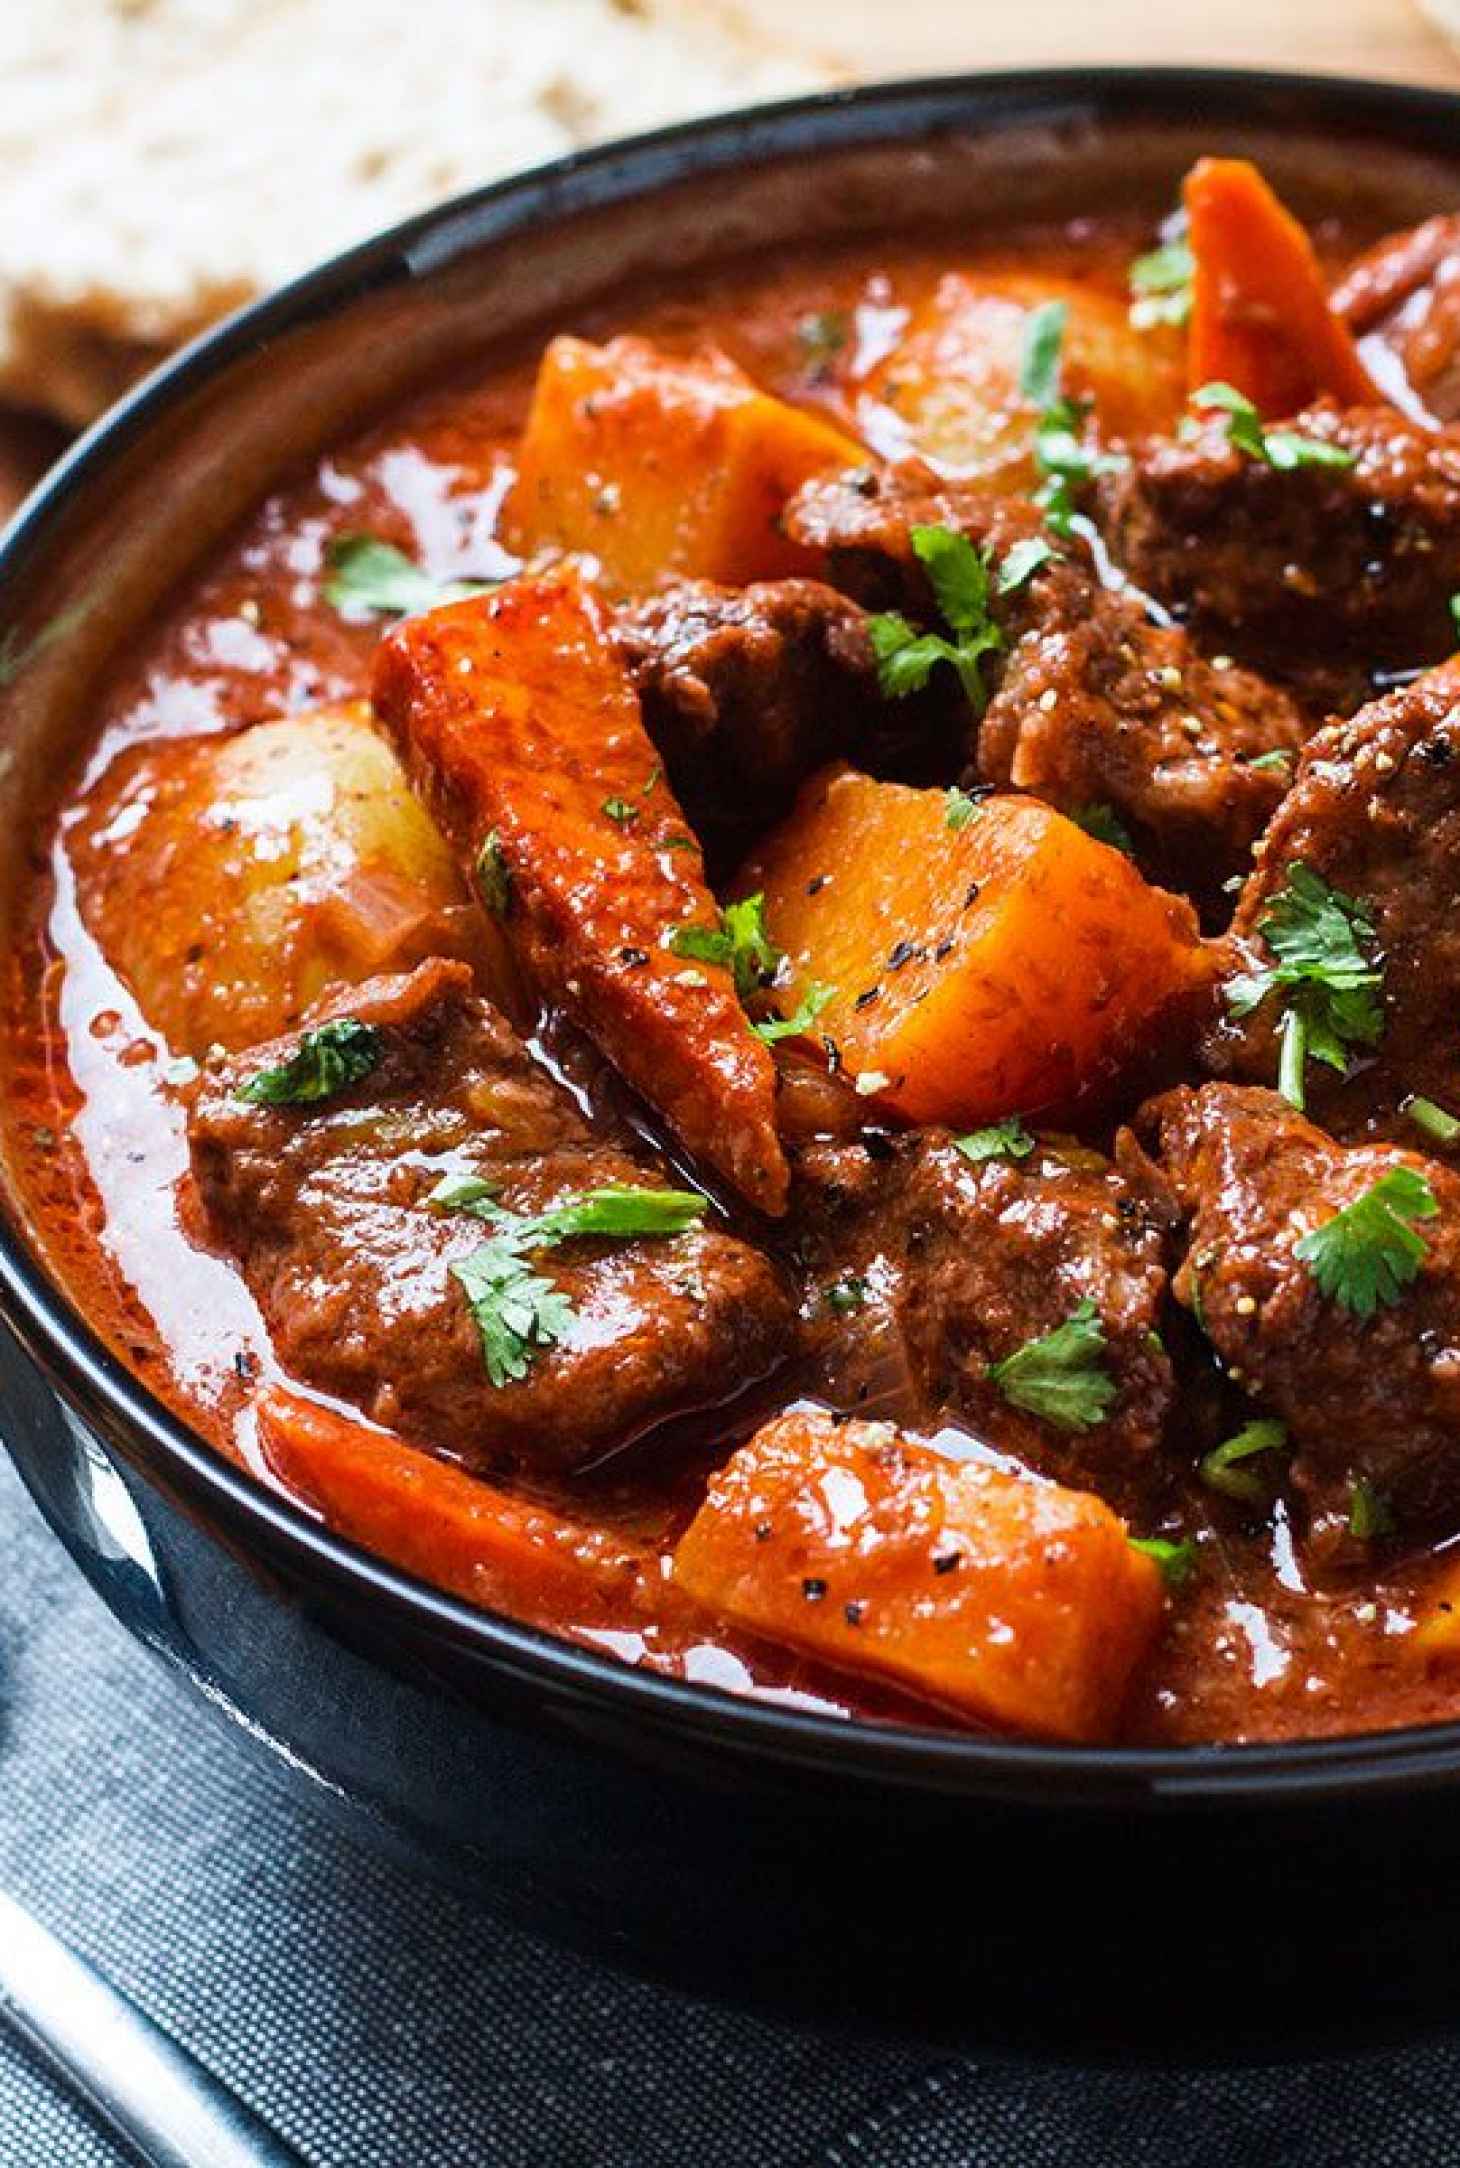 Slow Cooker Beef Stew Recipe With Butternut Carrot And Potatoes Eatwell101,Value Of Wheat Pennies By Year